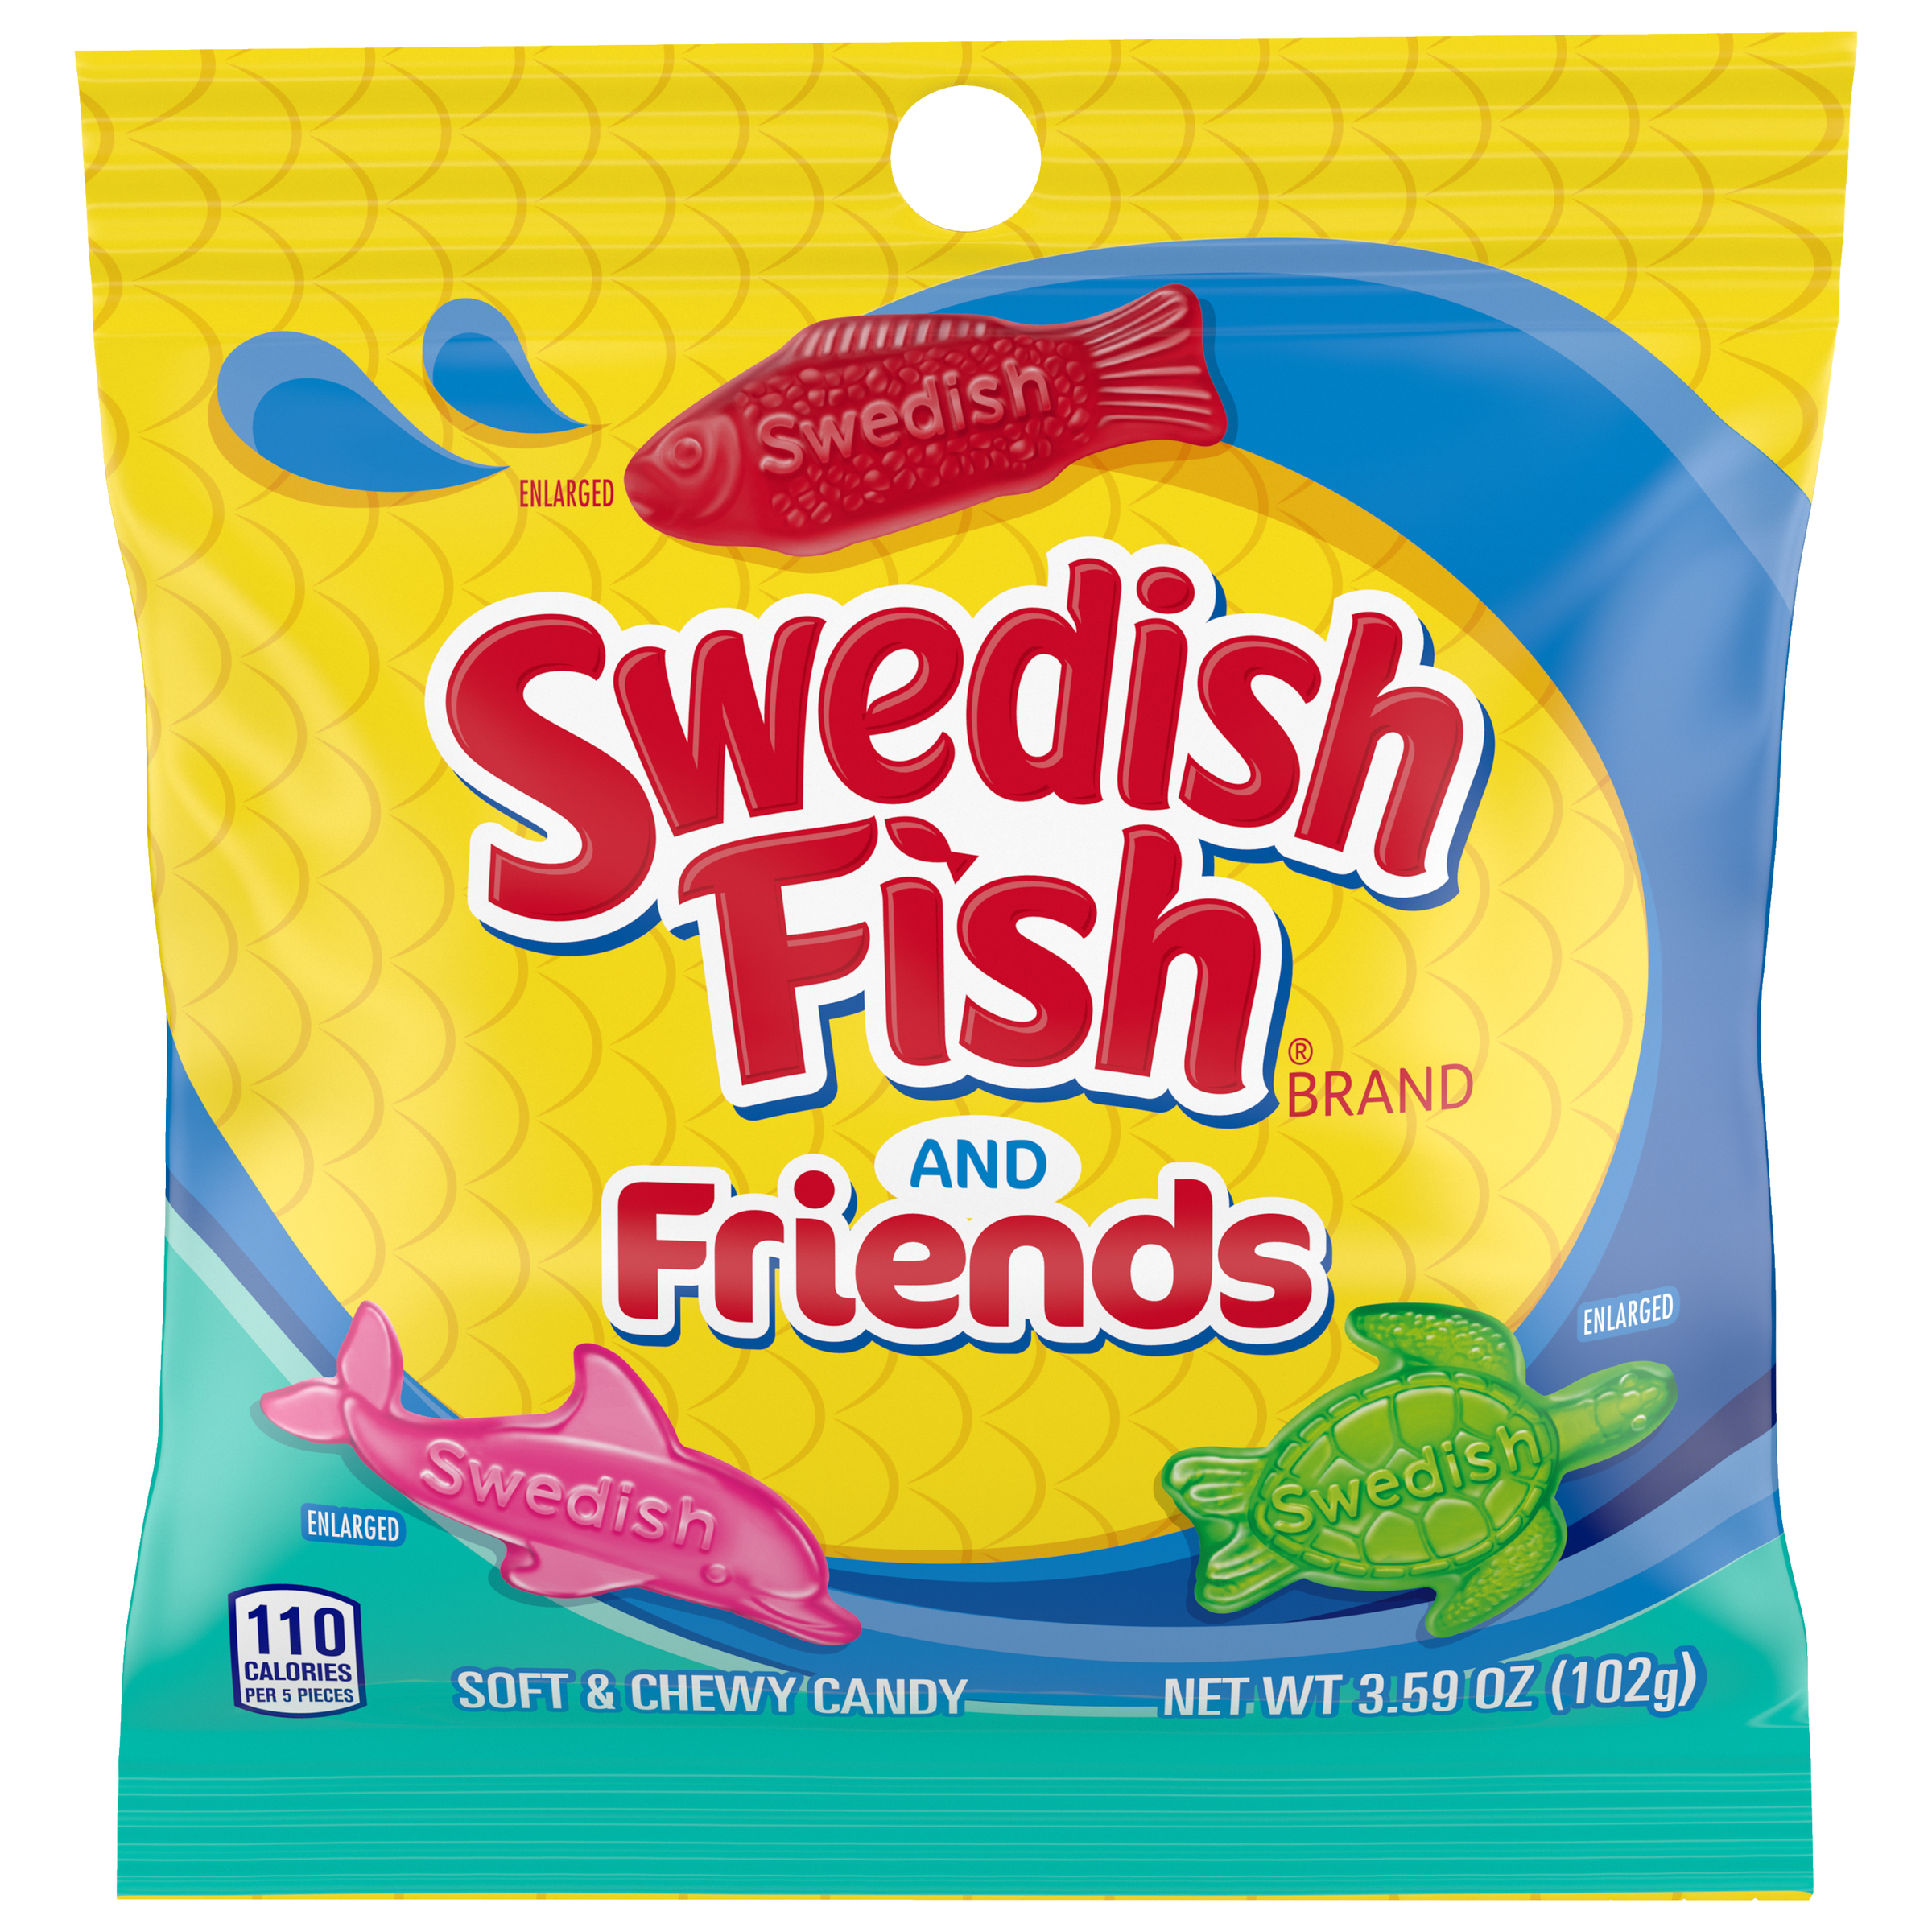 SWEDISH FISH and Friends Soft & Chewy Candy, 3.59 oz-0